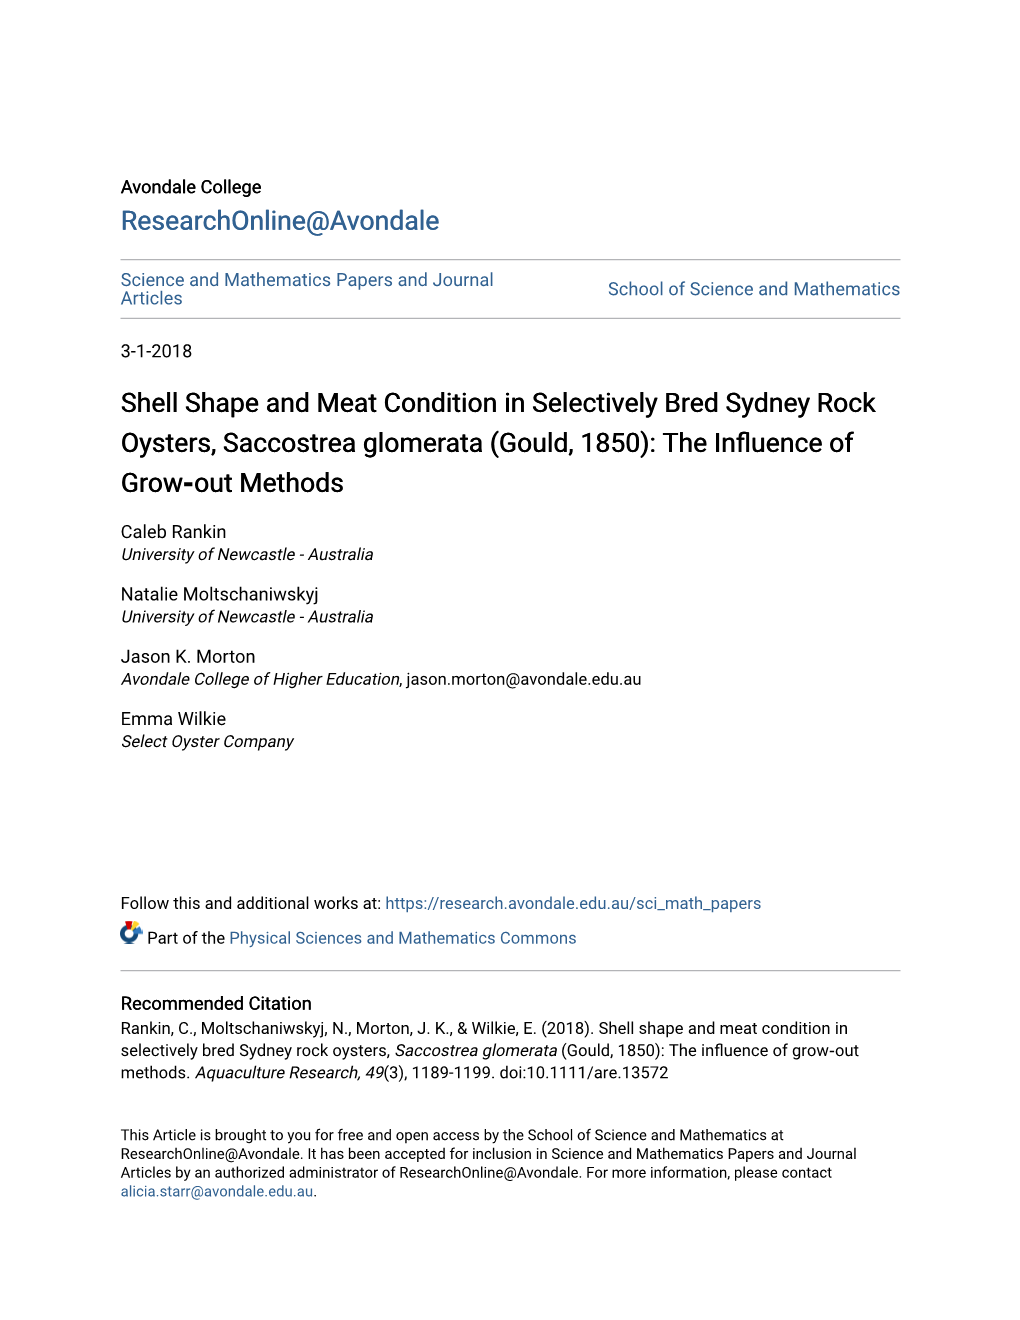 Shell Shape and Meat Condition in Selectively Bred Sydney Rock Oysters, Saccostrea Glomerata (Gould, 1850): the Influence of Grow‐Out Methods